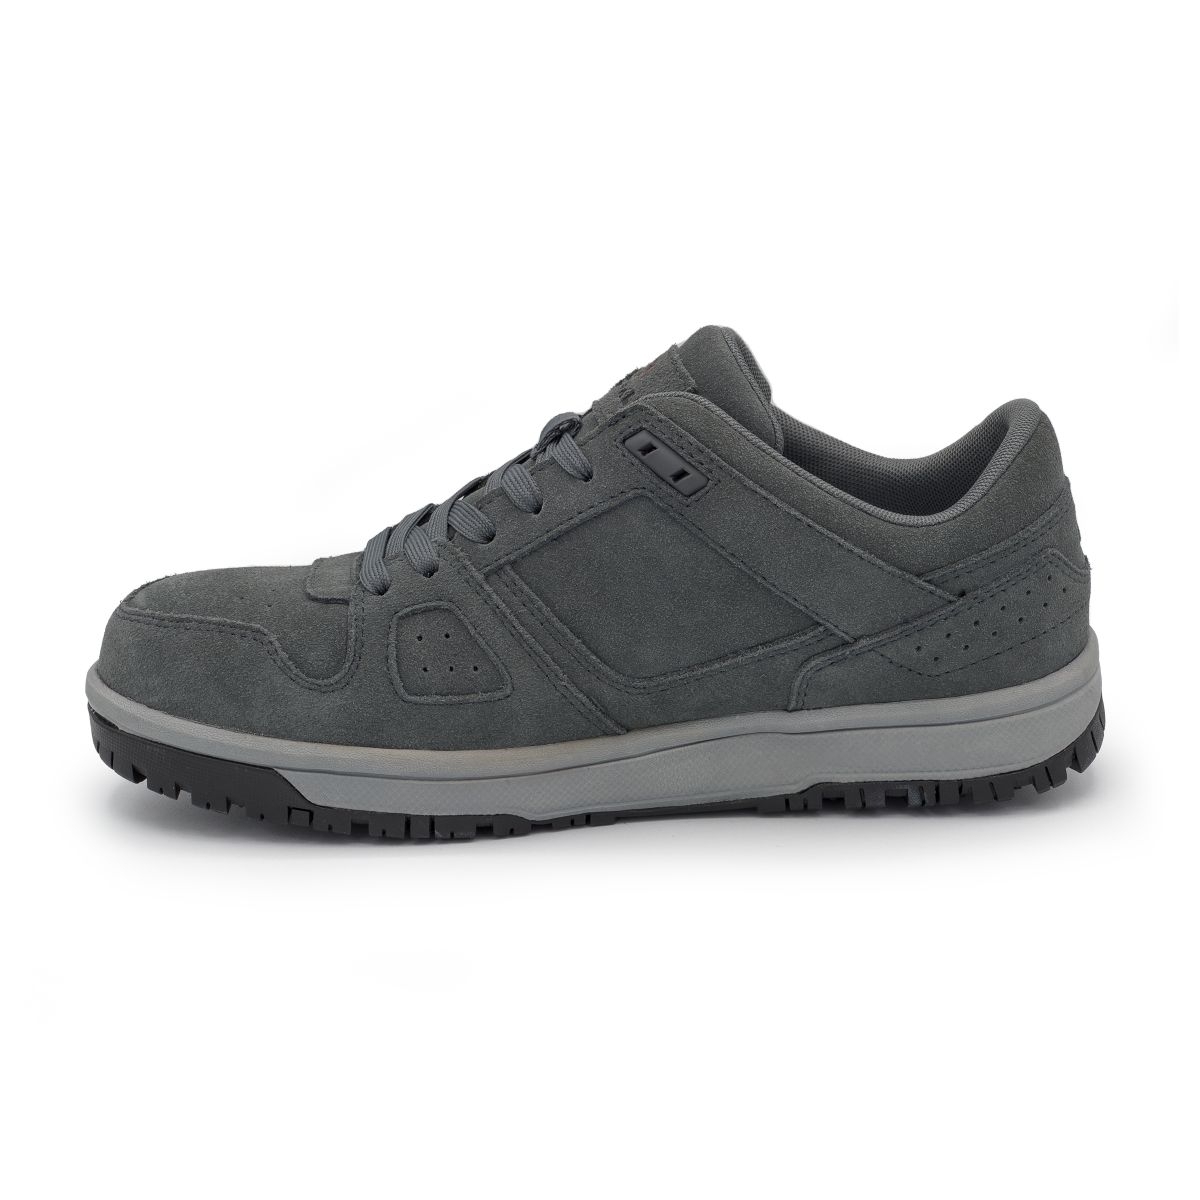 AIRWALK SAFETY Men's Mongo Composite Toe EH Work Shoe Charcoal/Grey - AW6301 CHARCOAL/GRAY - CHARCOAL/GRAY, 8-W